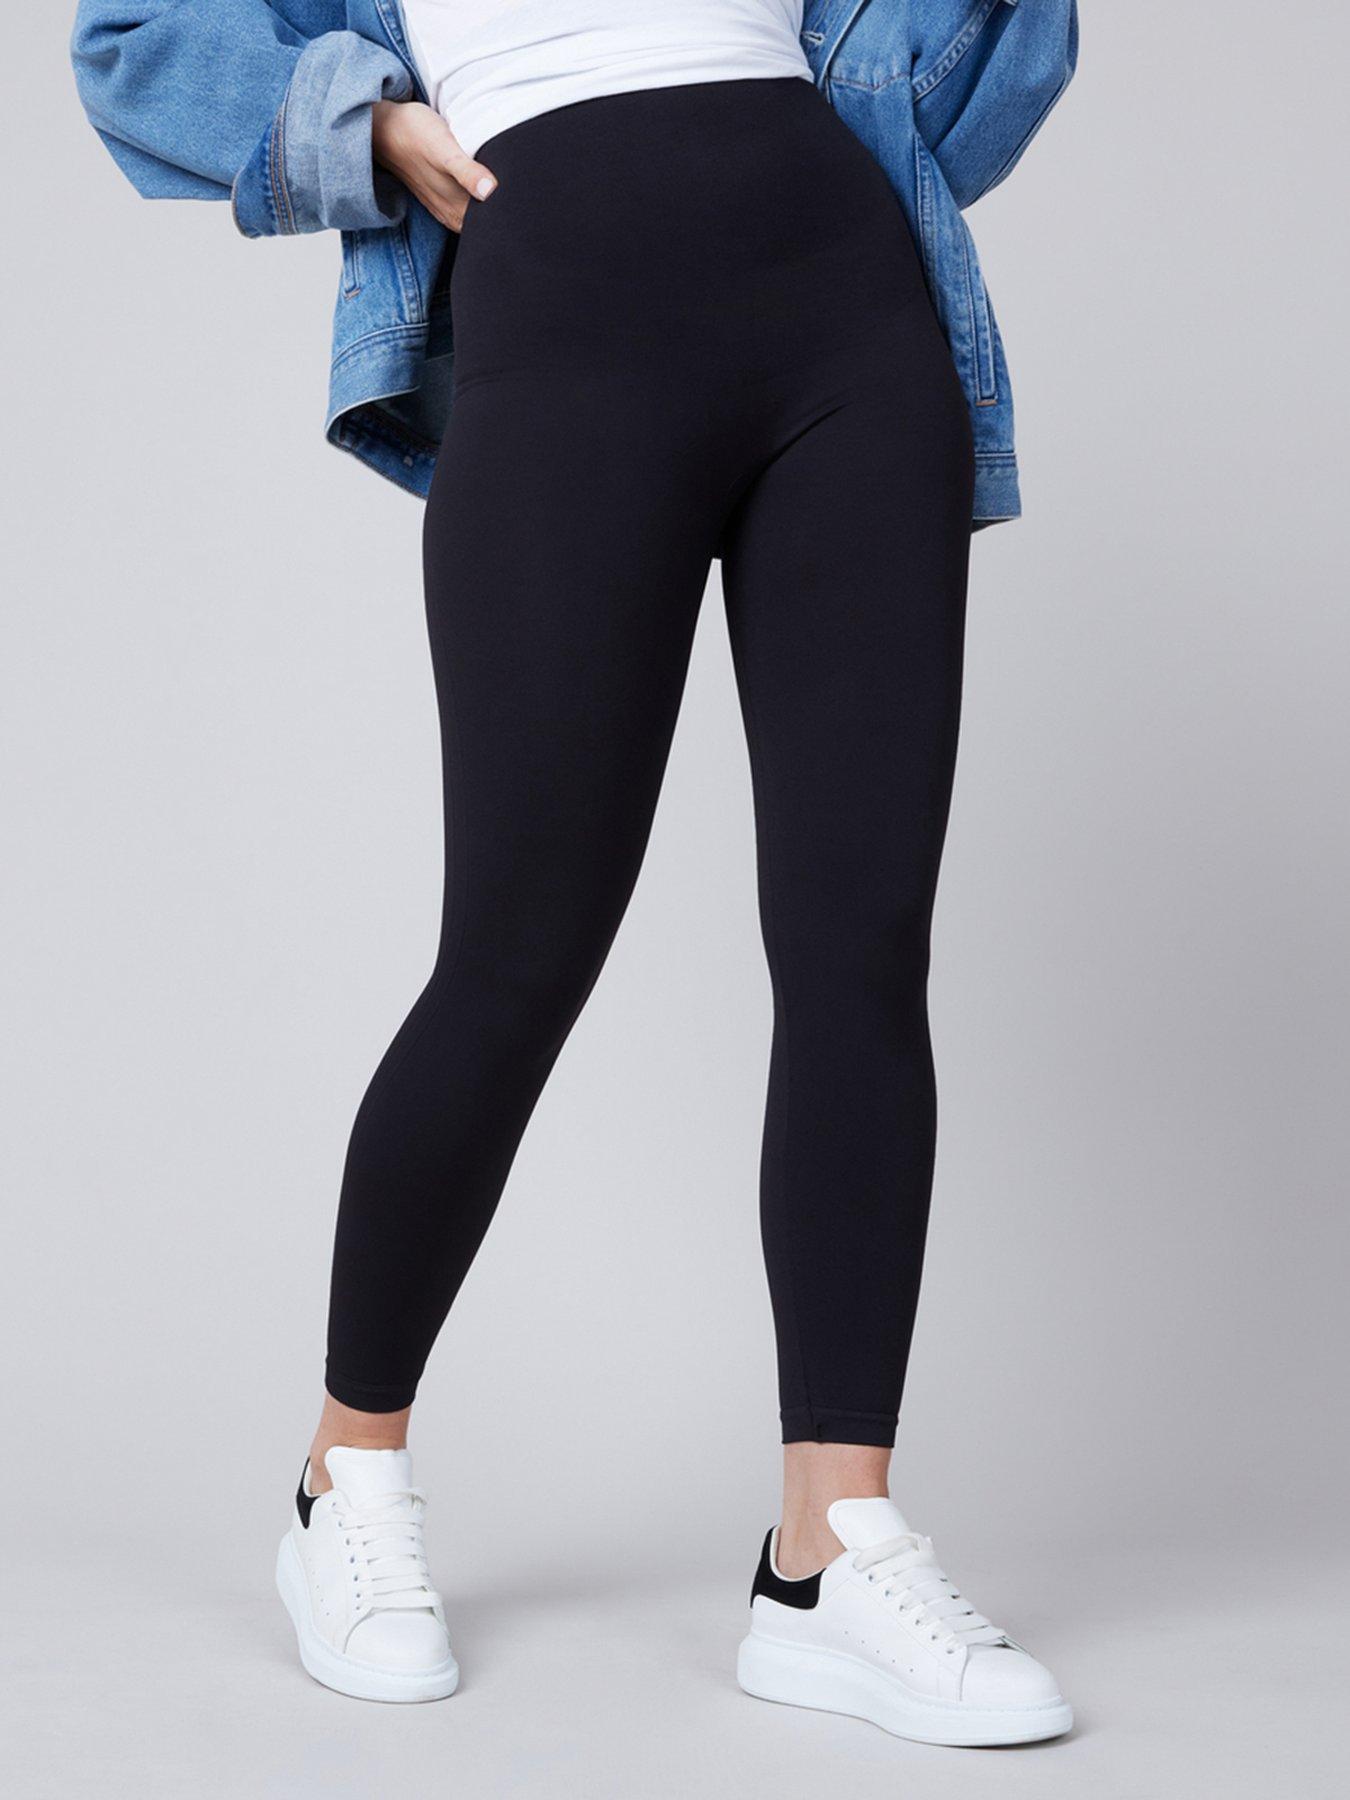 Spanx Look At Me Now Seamless Legging In Stock At UK Tights